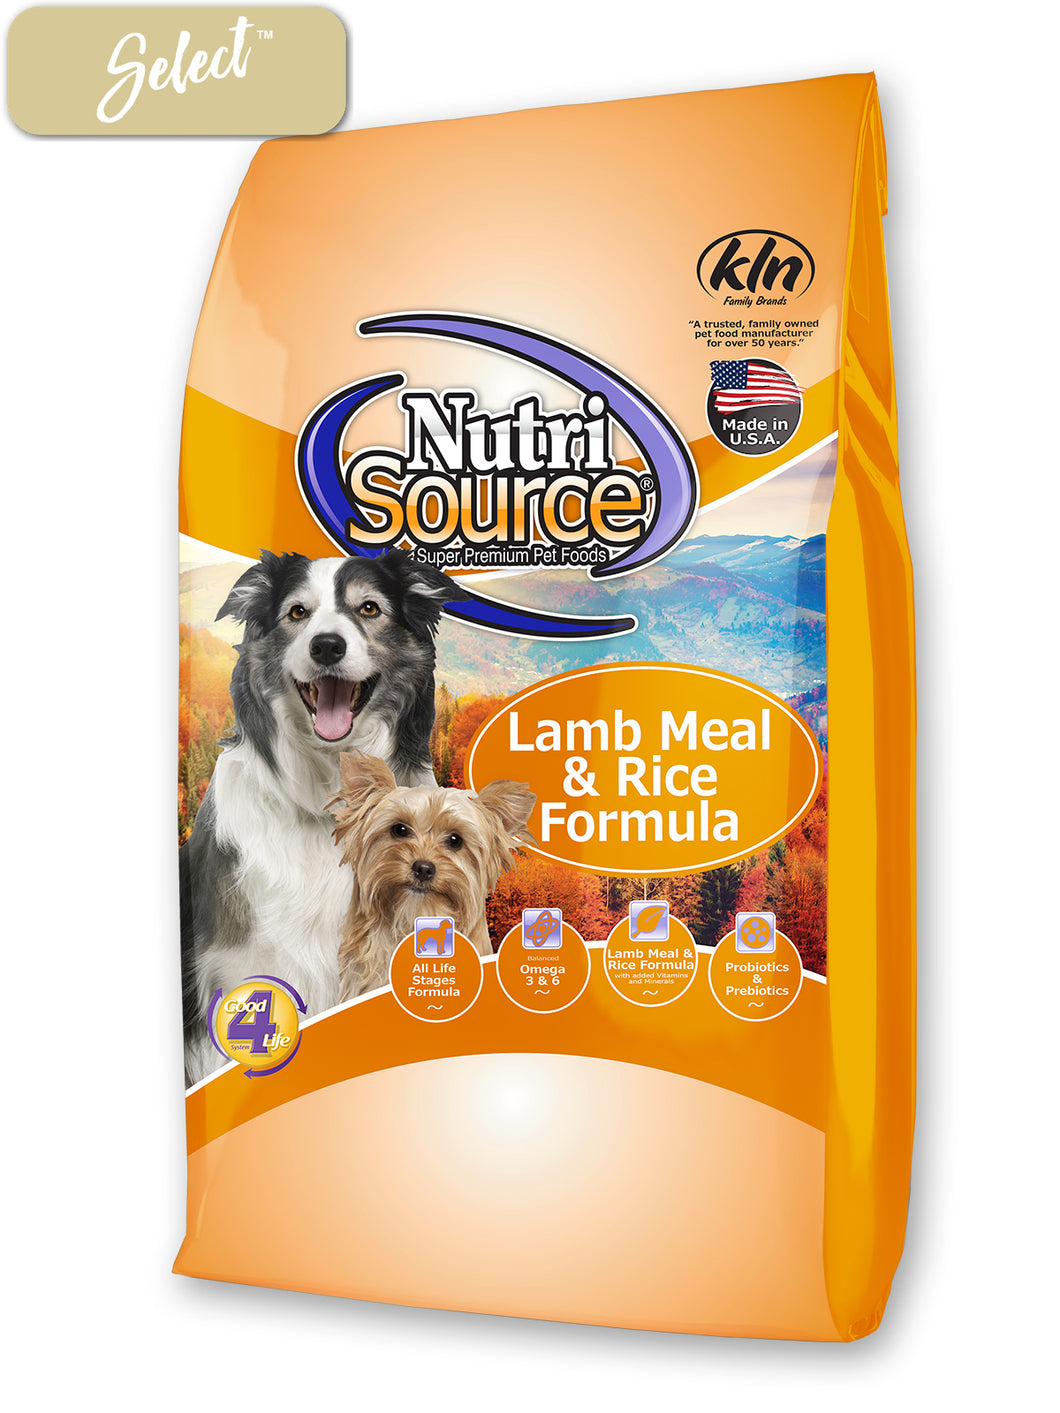 Nutrisource Lamb Meal and Rice Dog Food